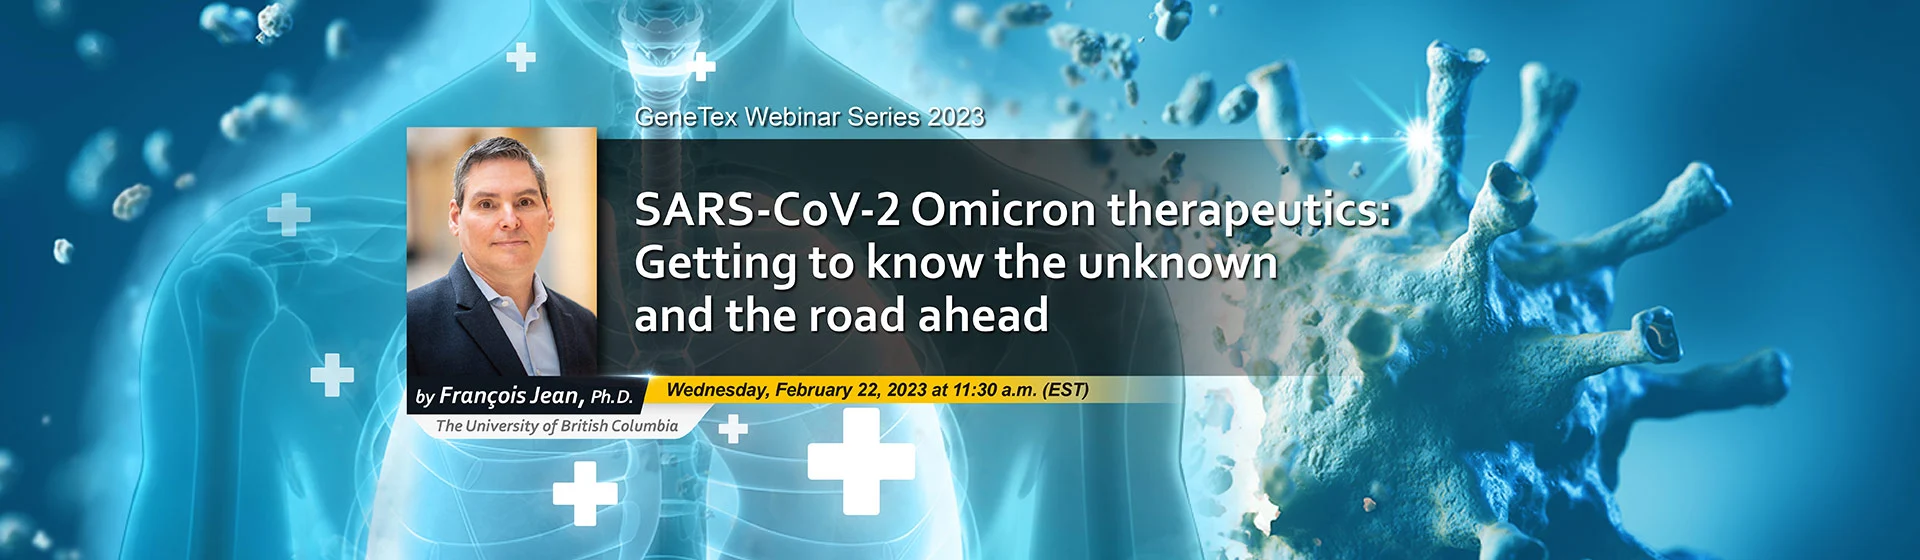 SARS-CoV-2 Omicron therapeutics: Getting to know the unknown and the road ahead